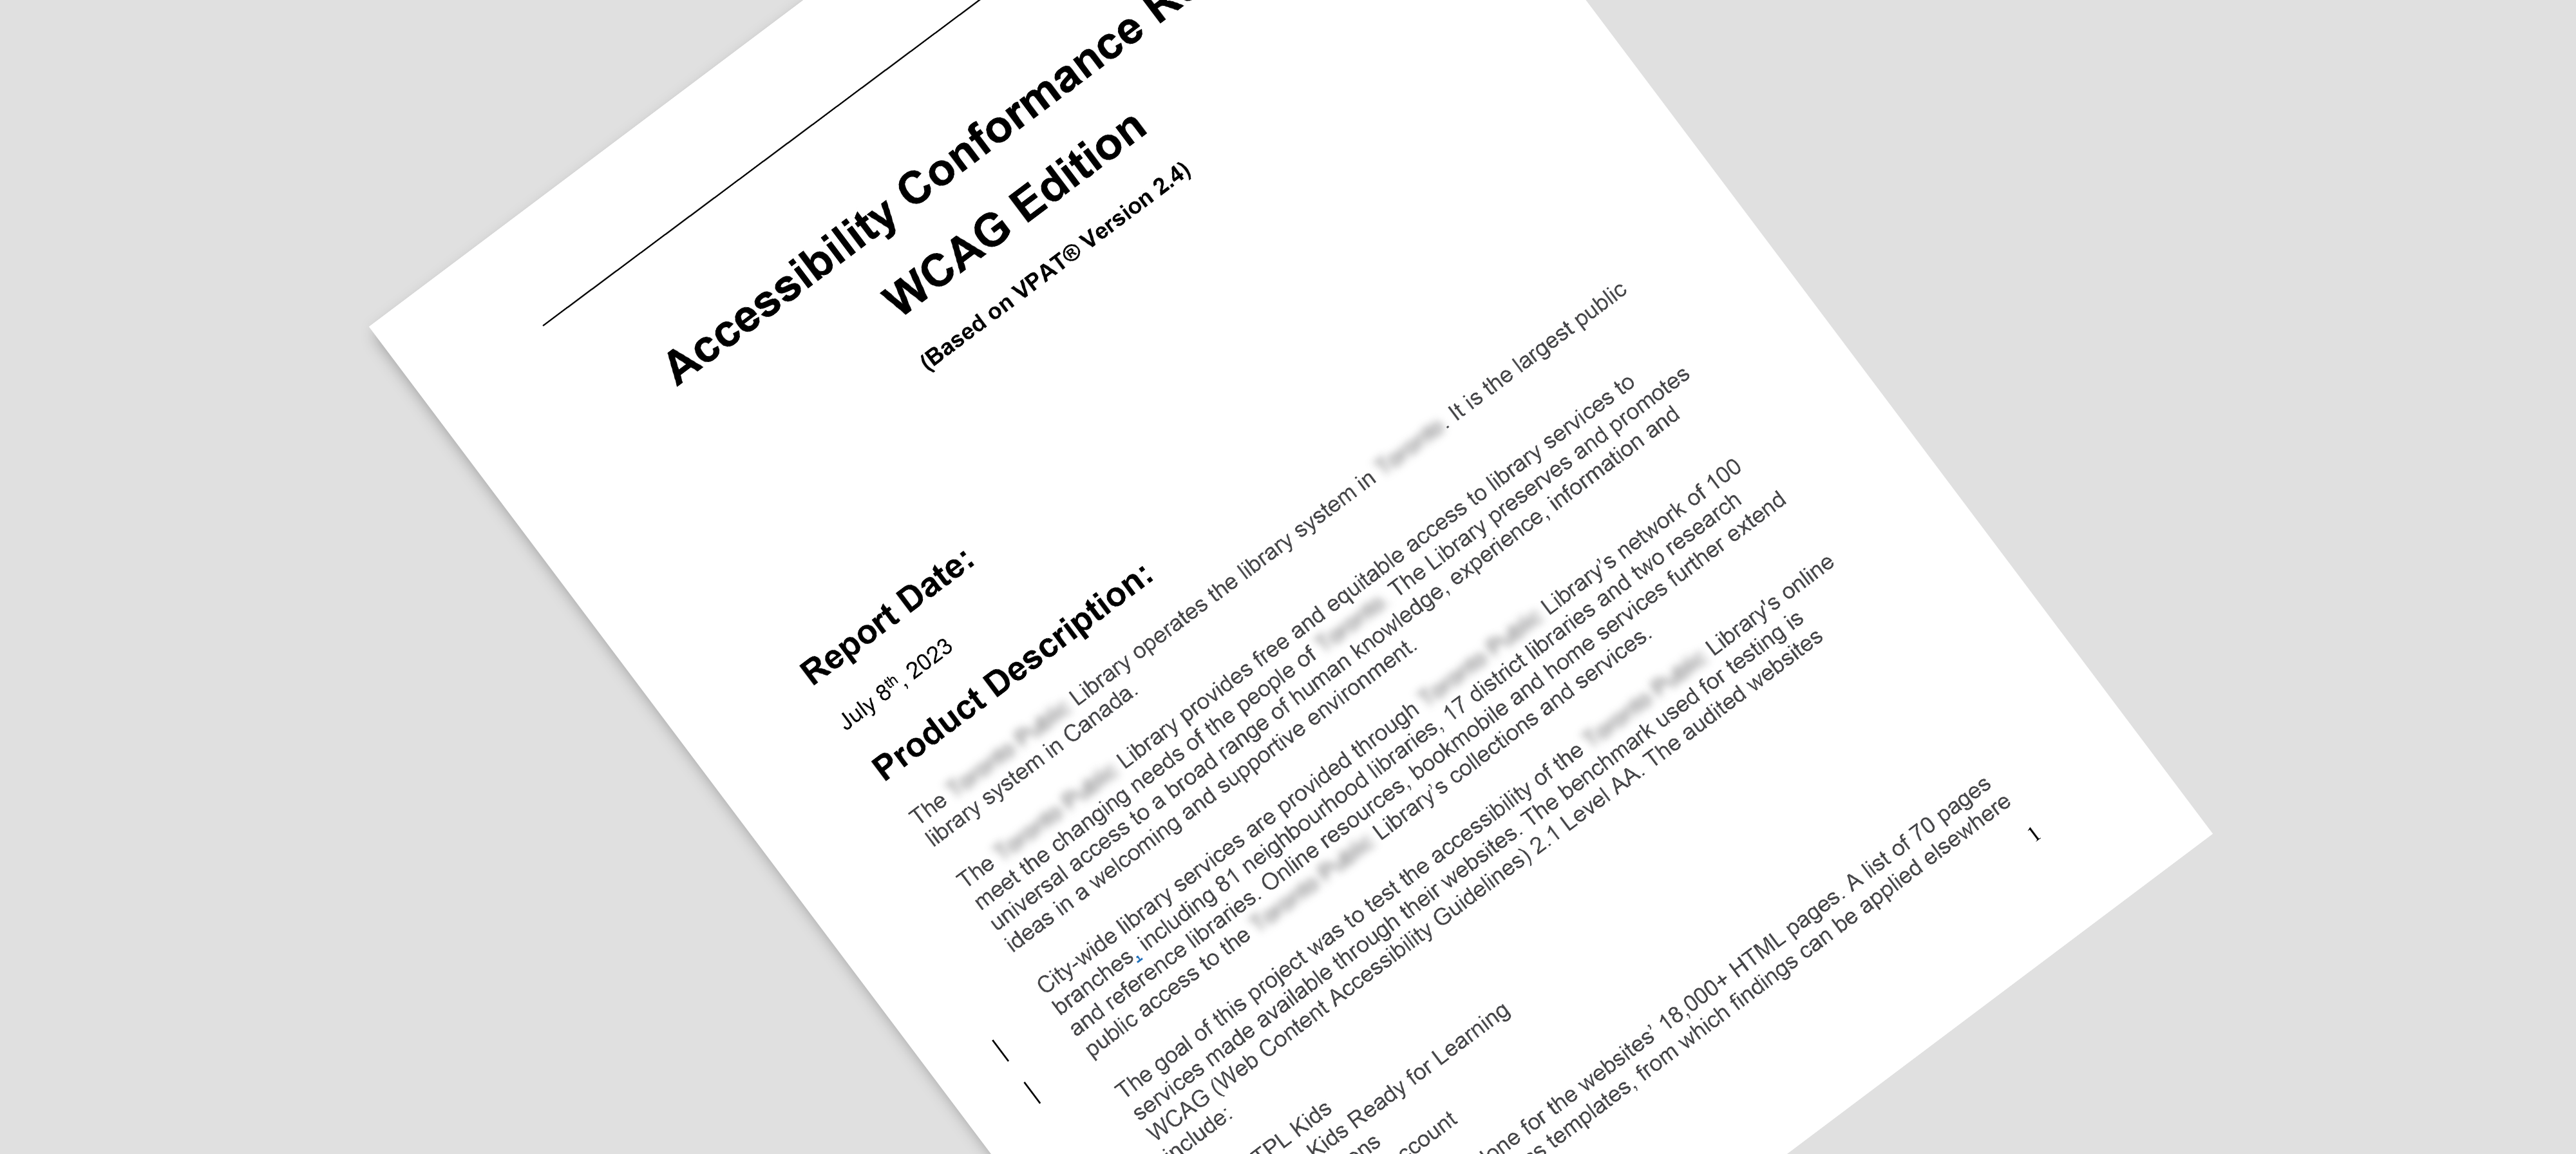 An accessibility conformance report cover page